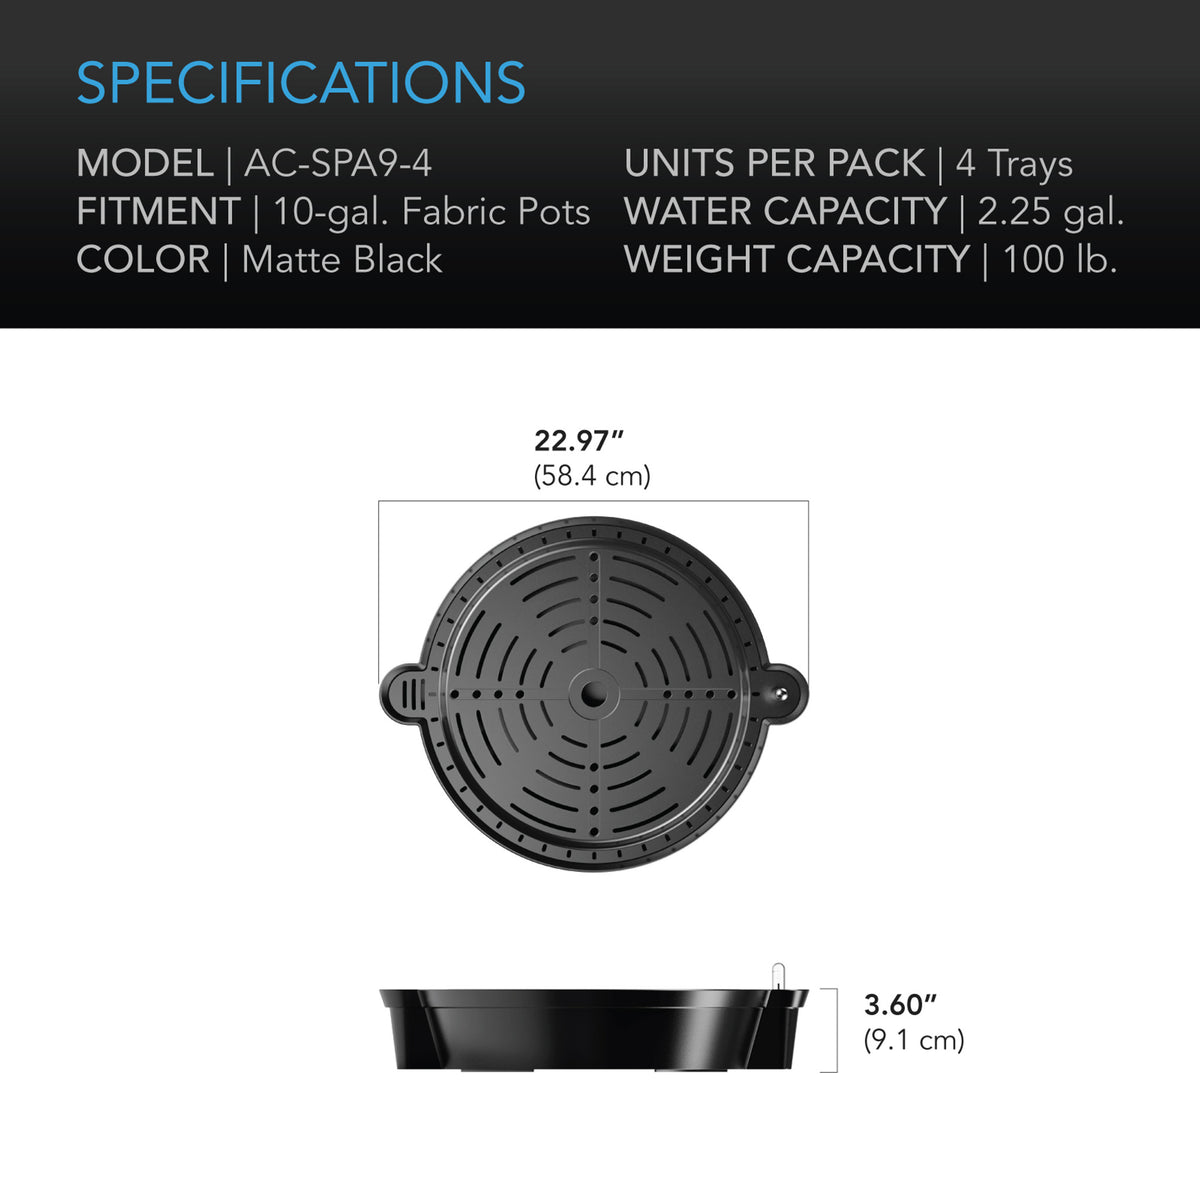 XL Self watering pot specifications